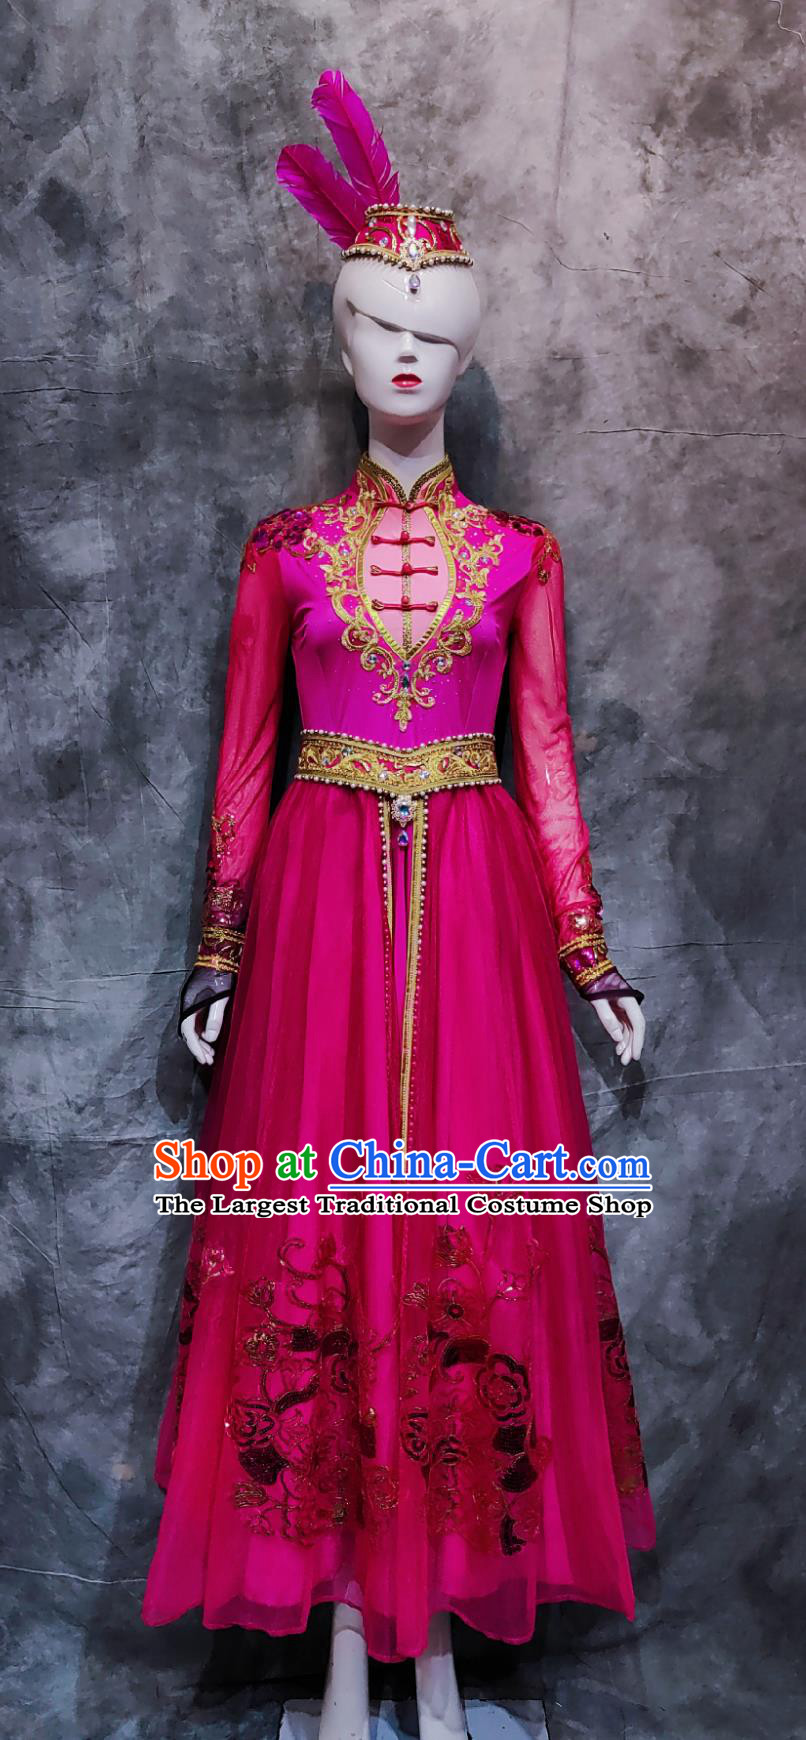 China Uyghur National Minority Woman Rosy Dress Traditional Xinjiang Performance Costume Chinese Uighur Ethnic Festival Dance Clothing